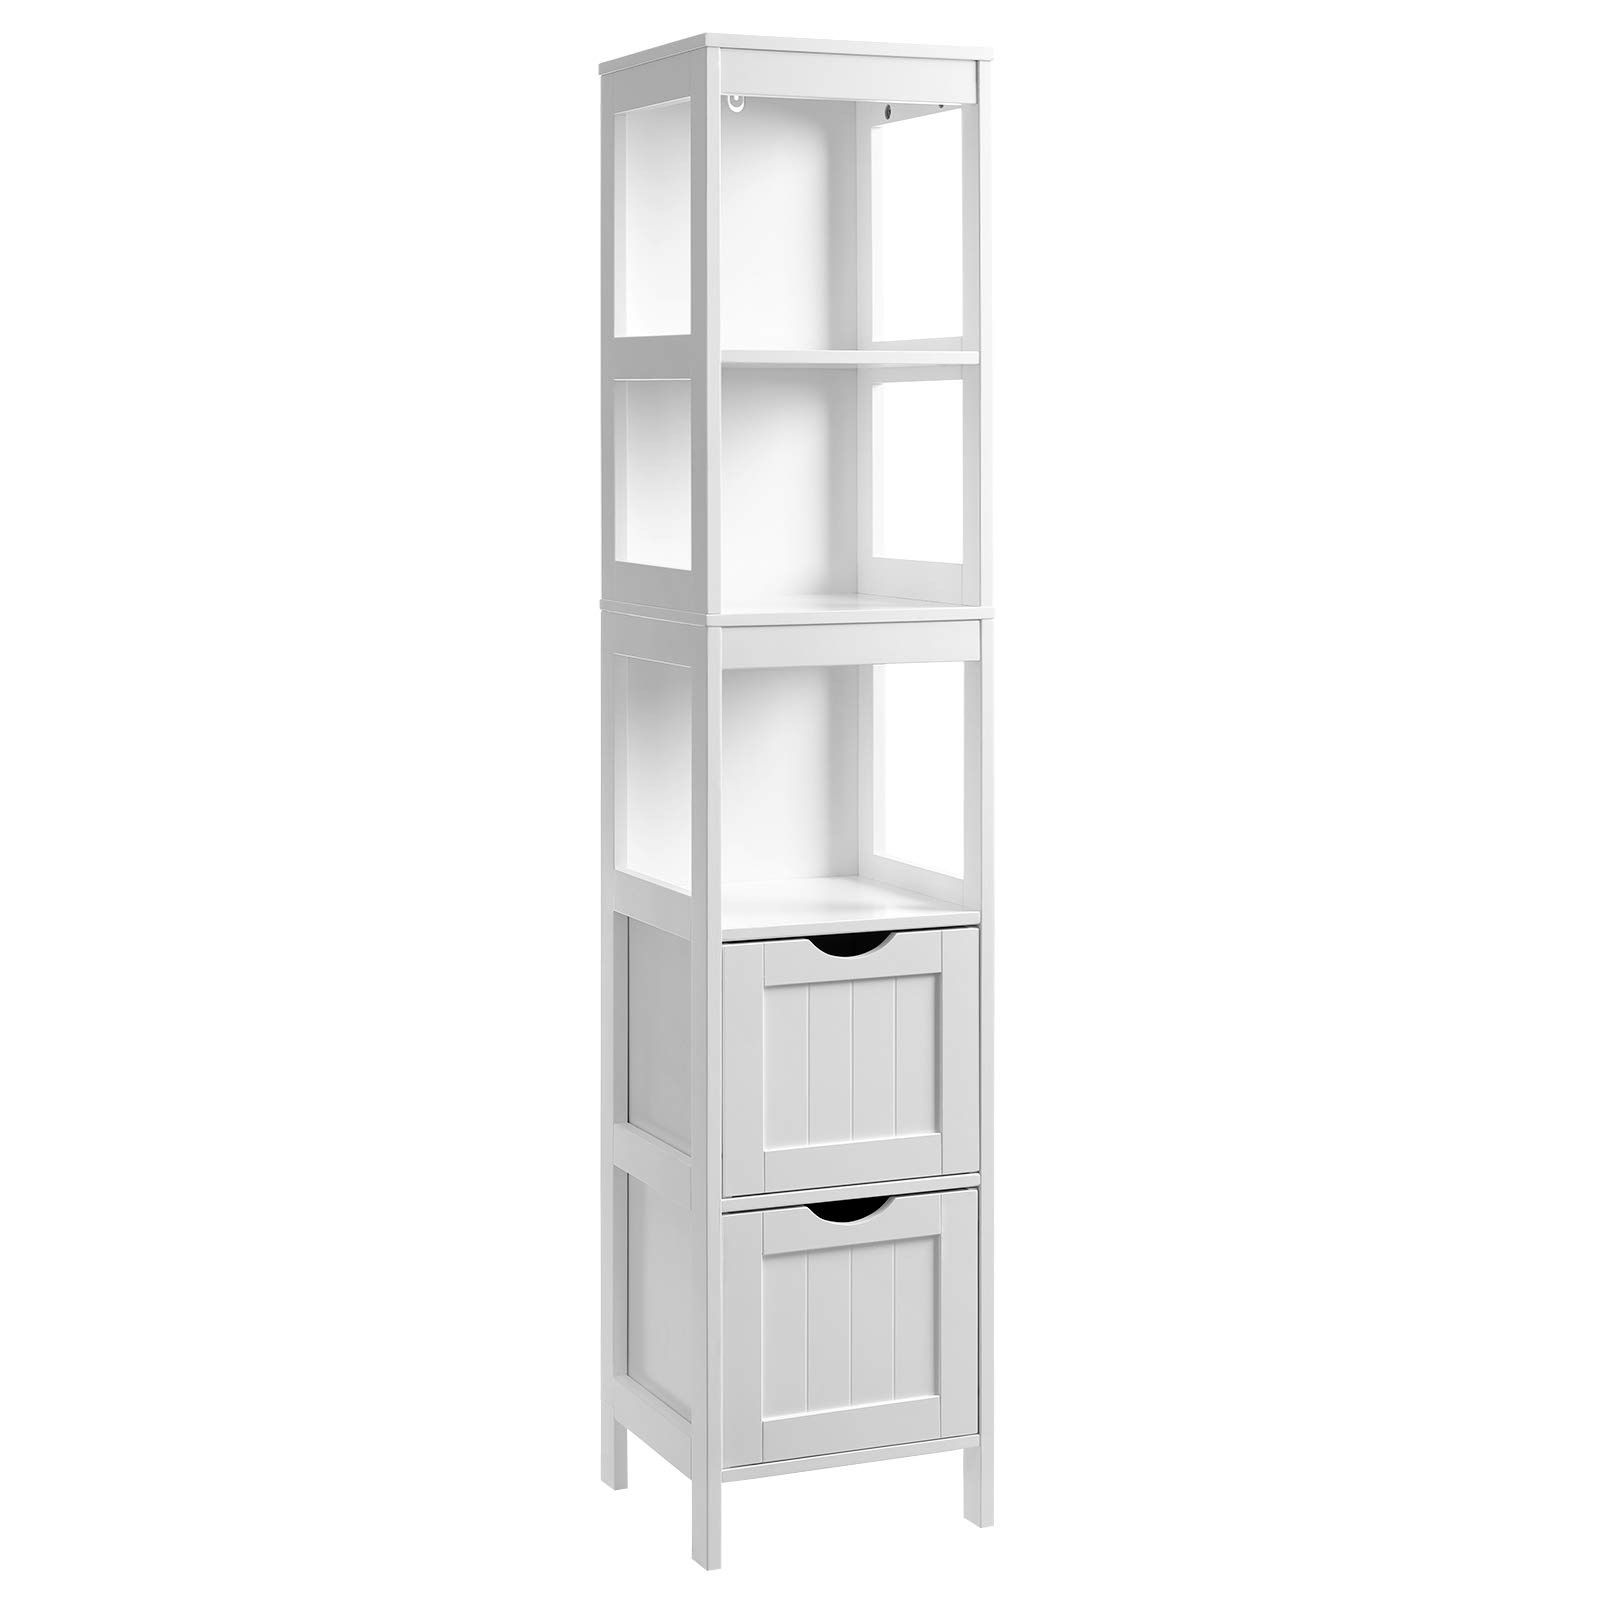 VASAGLE Bathroom Tall Cabinet, Linen Tower, Floor Storage Cupboard, with 2 Drawers and 3 Open Shelves, 11.8 x 11.8 x 55.7 Inches, for Bathroom, Living